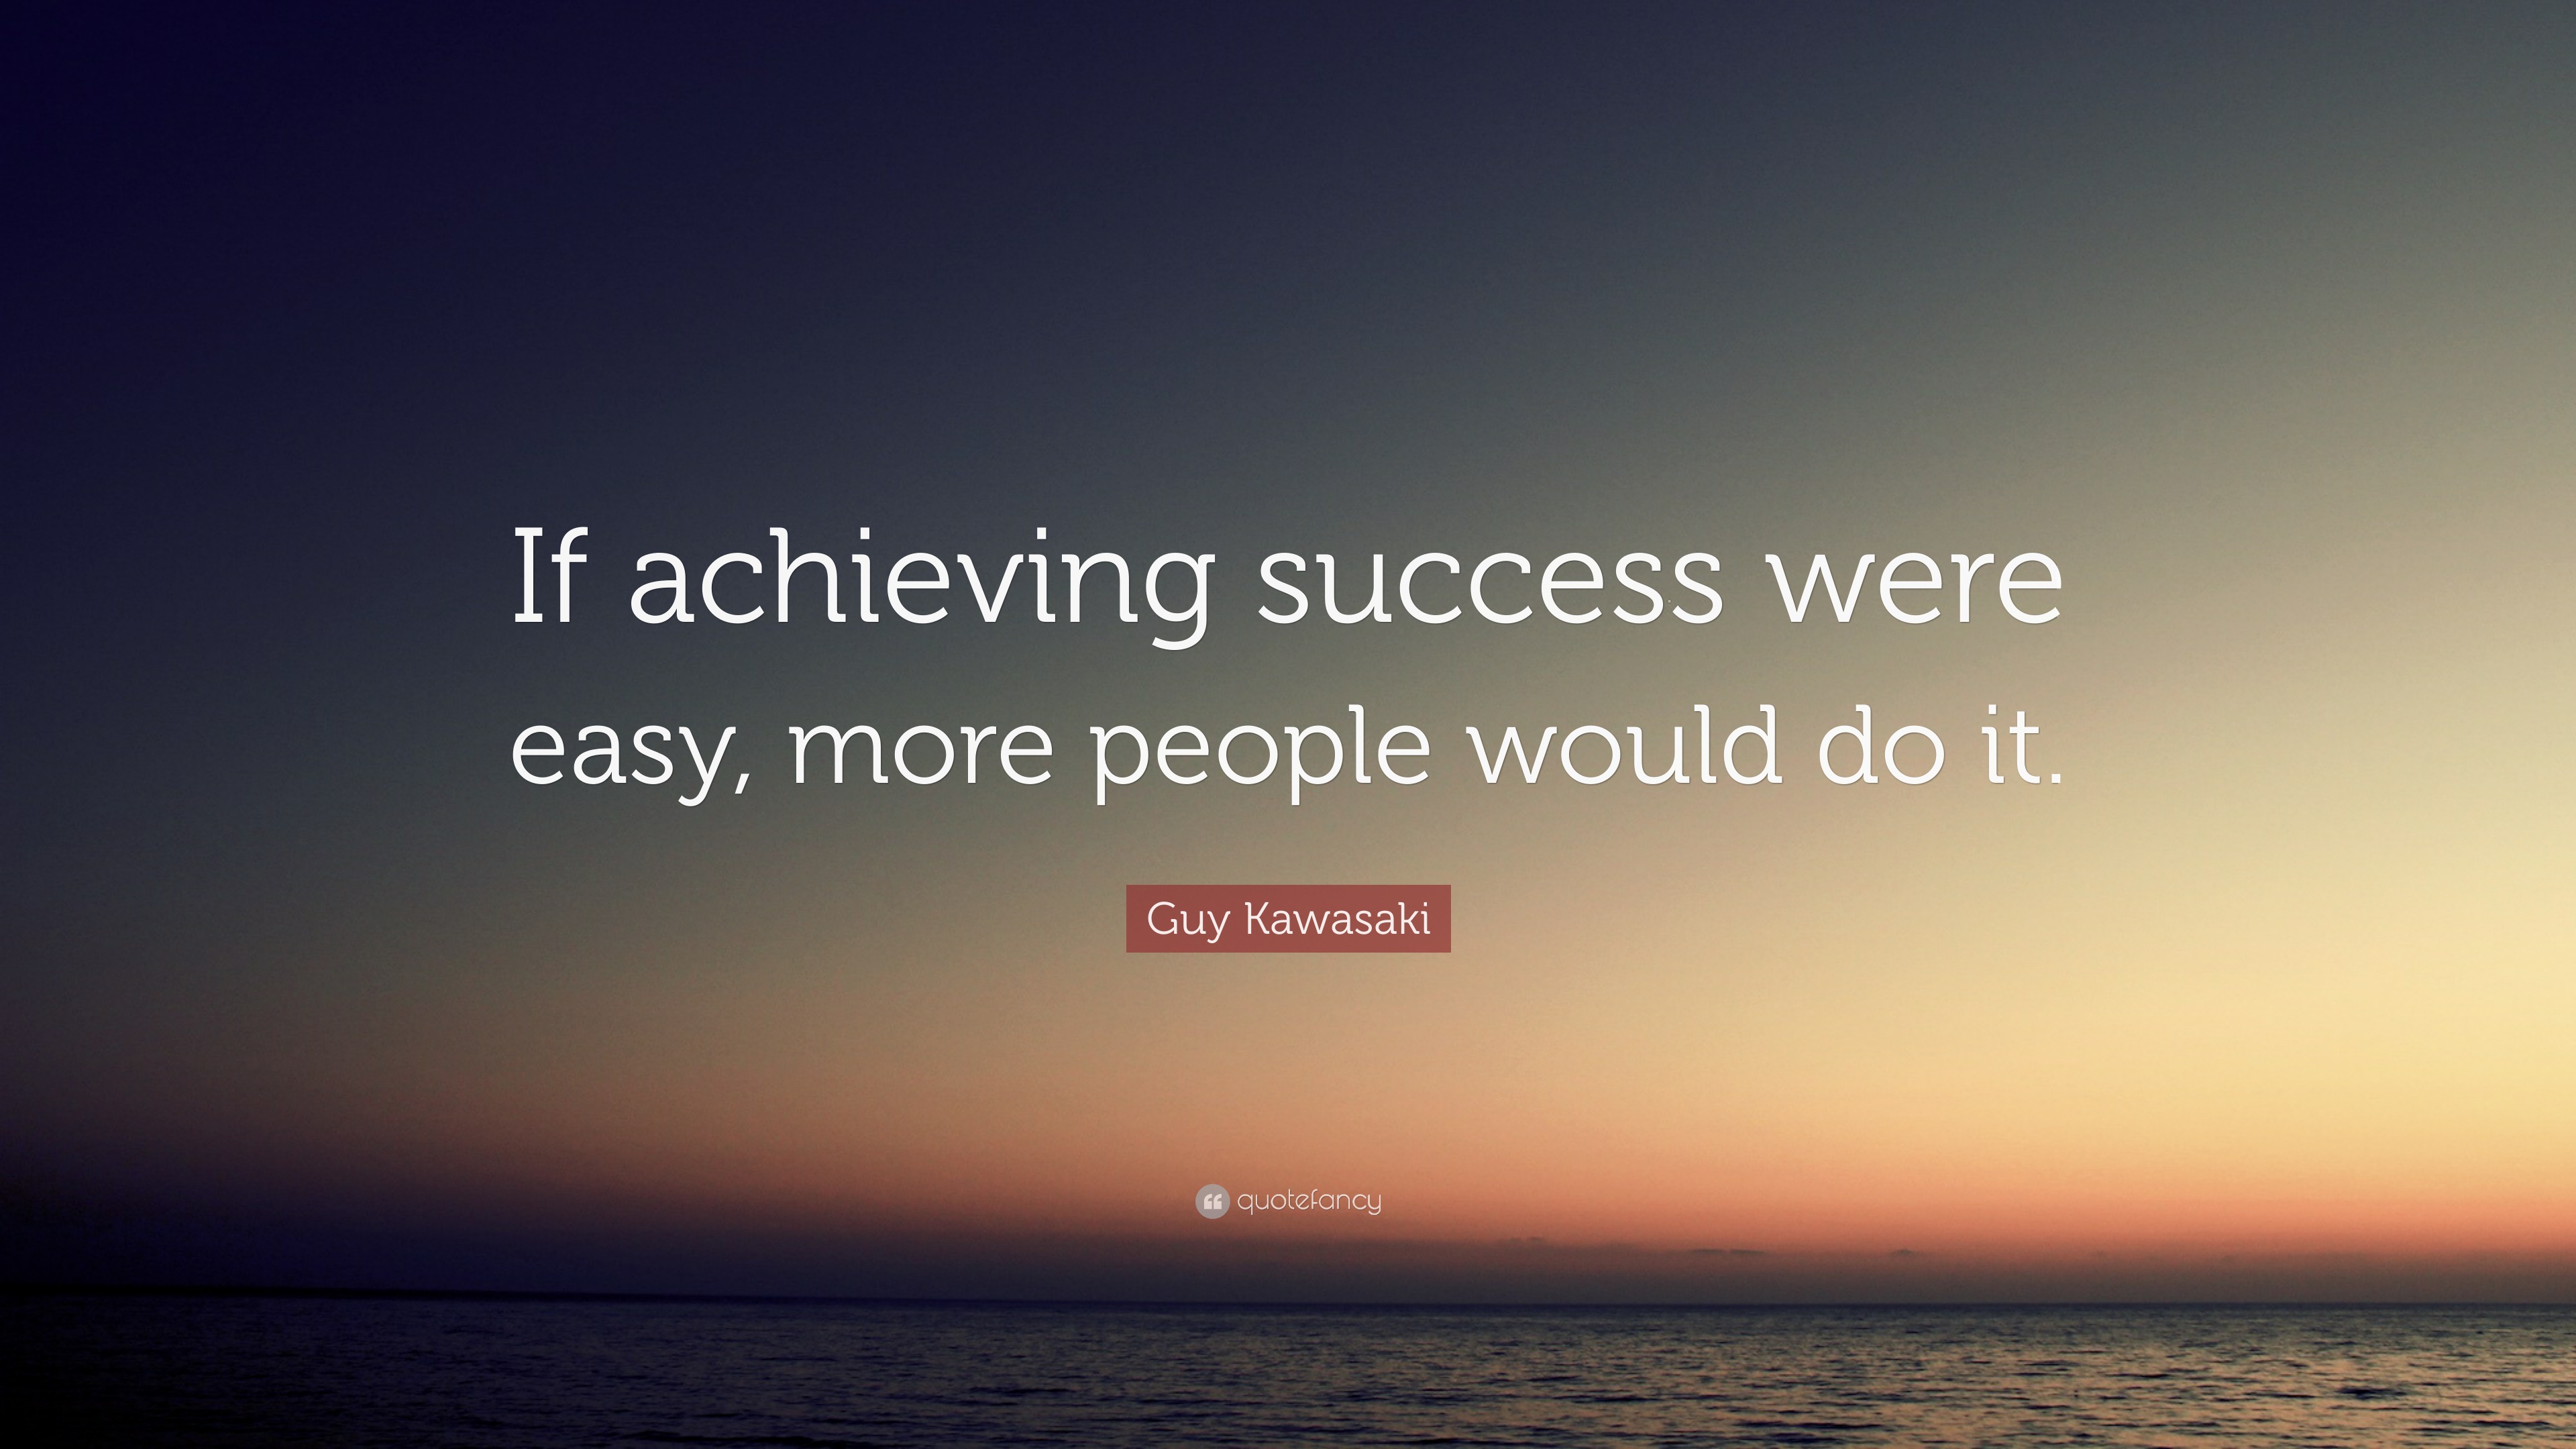 Guy Kawasaki Quote: “If achieving success were easy, more people would ...